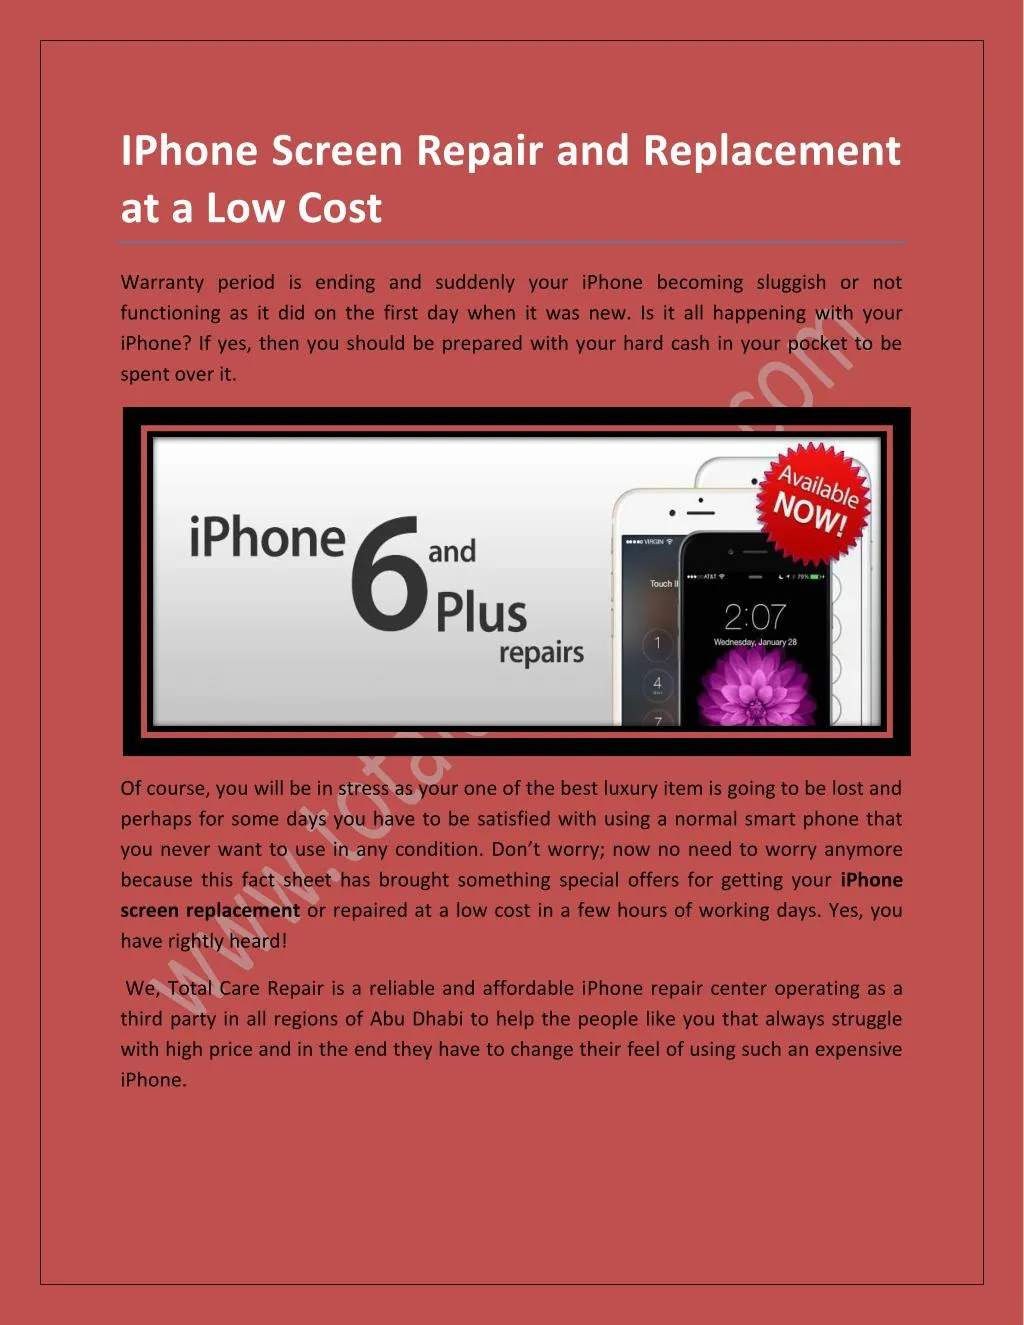 iphone screen repair and replacement at a low cost